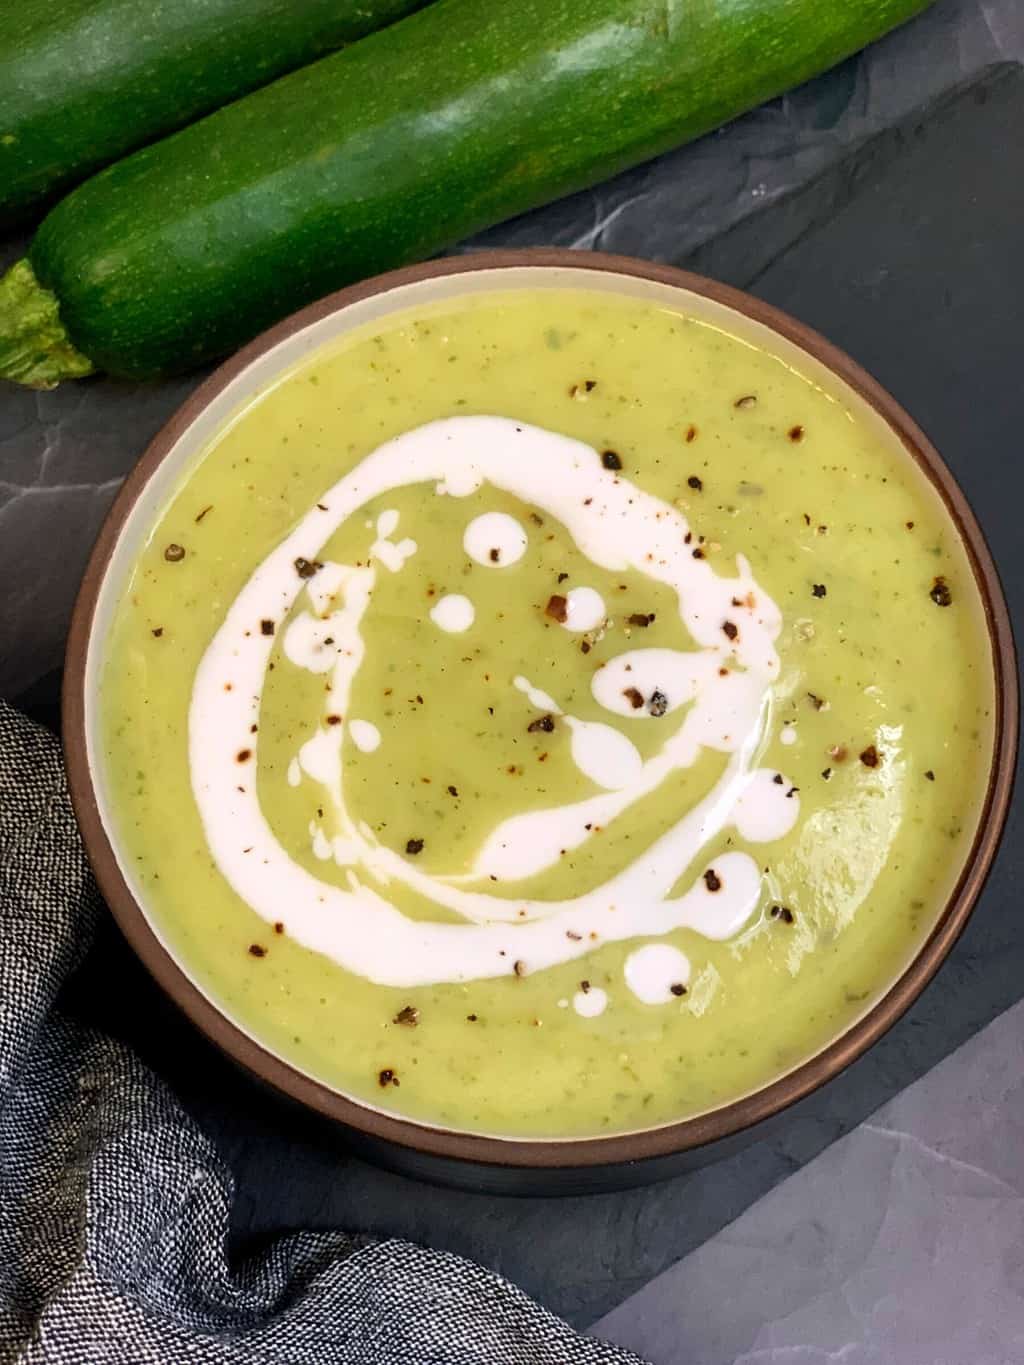 courgette soup with coconut milk served in a bowl and two raw zucchini on the side